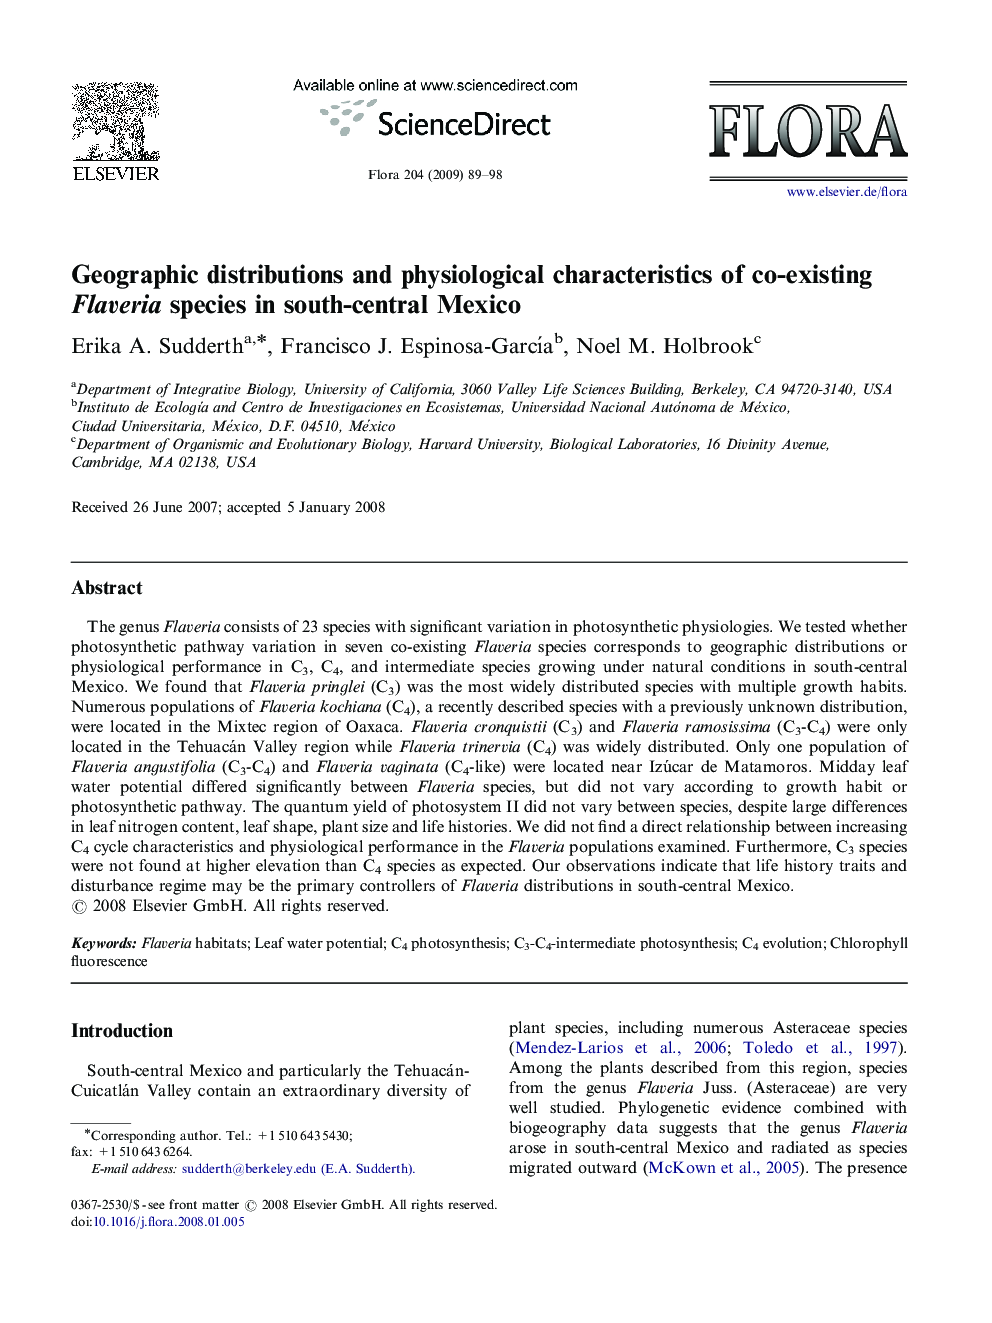 Geographic distributions and physiological characteristics of co-existing Flaveria species in south-central Mexico